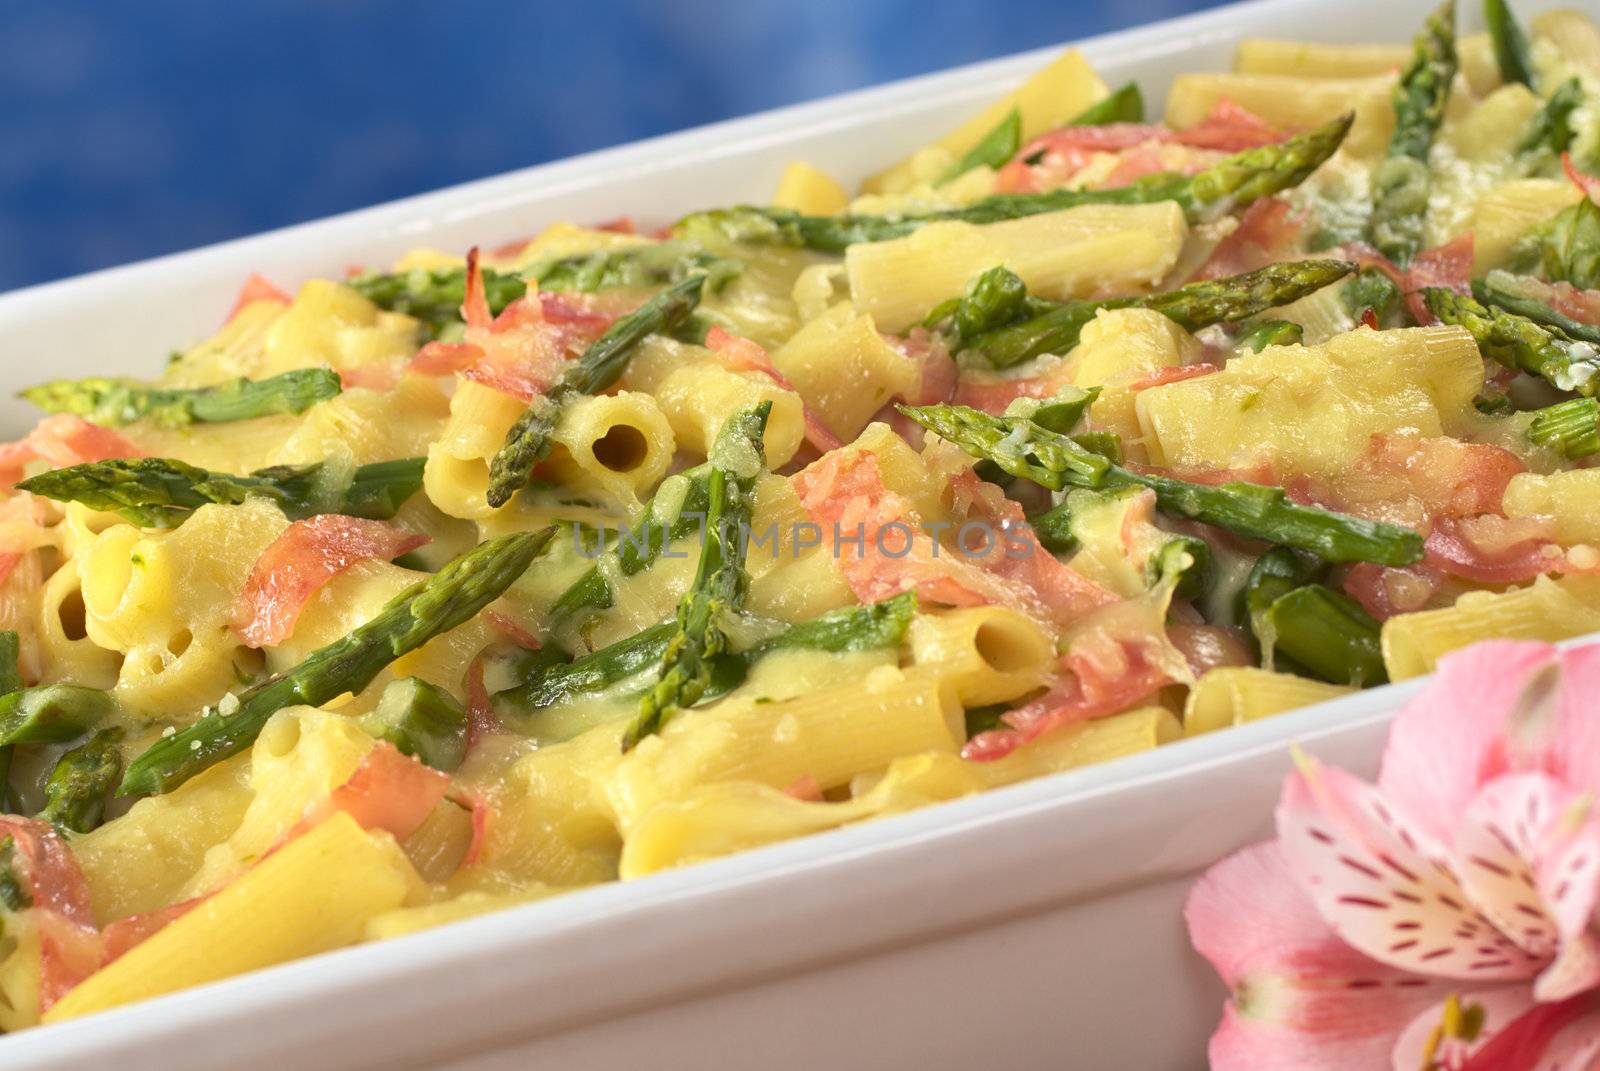 Green asparagus-ham-macaroni casserole with grated cheese on top and a pink Inca Lily in front (Selective Focus, Focus one third into the dish)